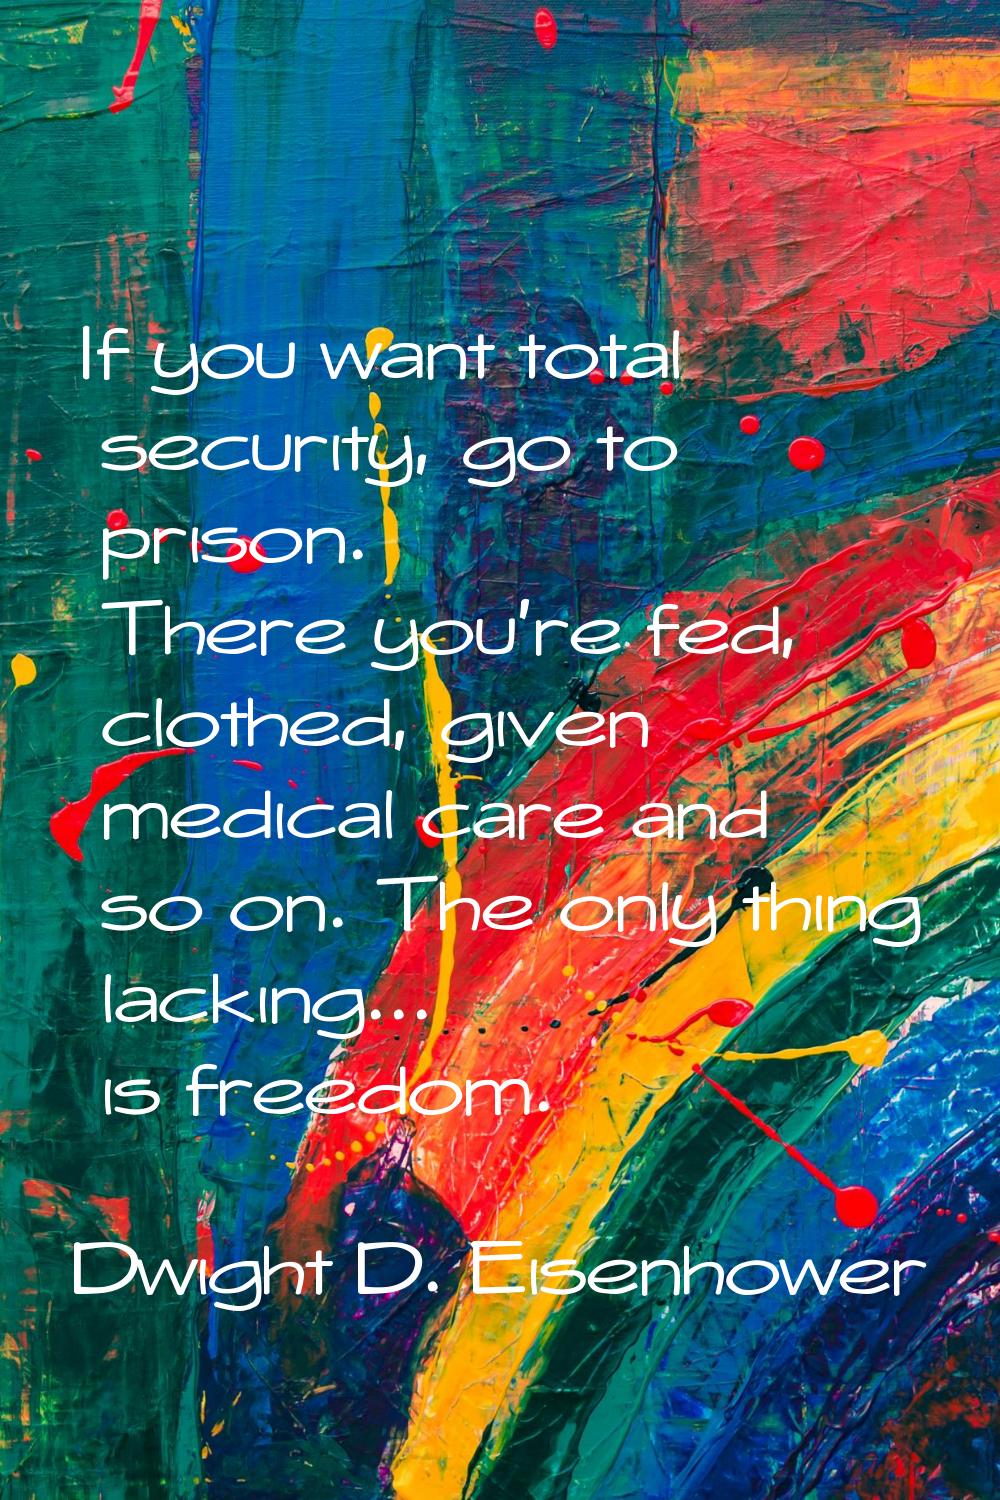 If you want total security, go to prison. There you're fed, clothed, given medical care and so on. 